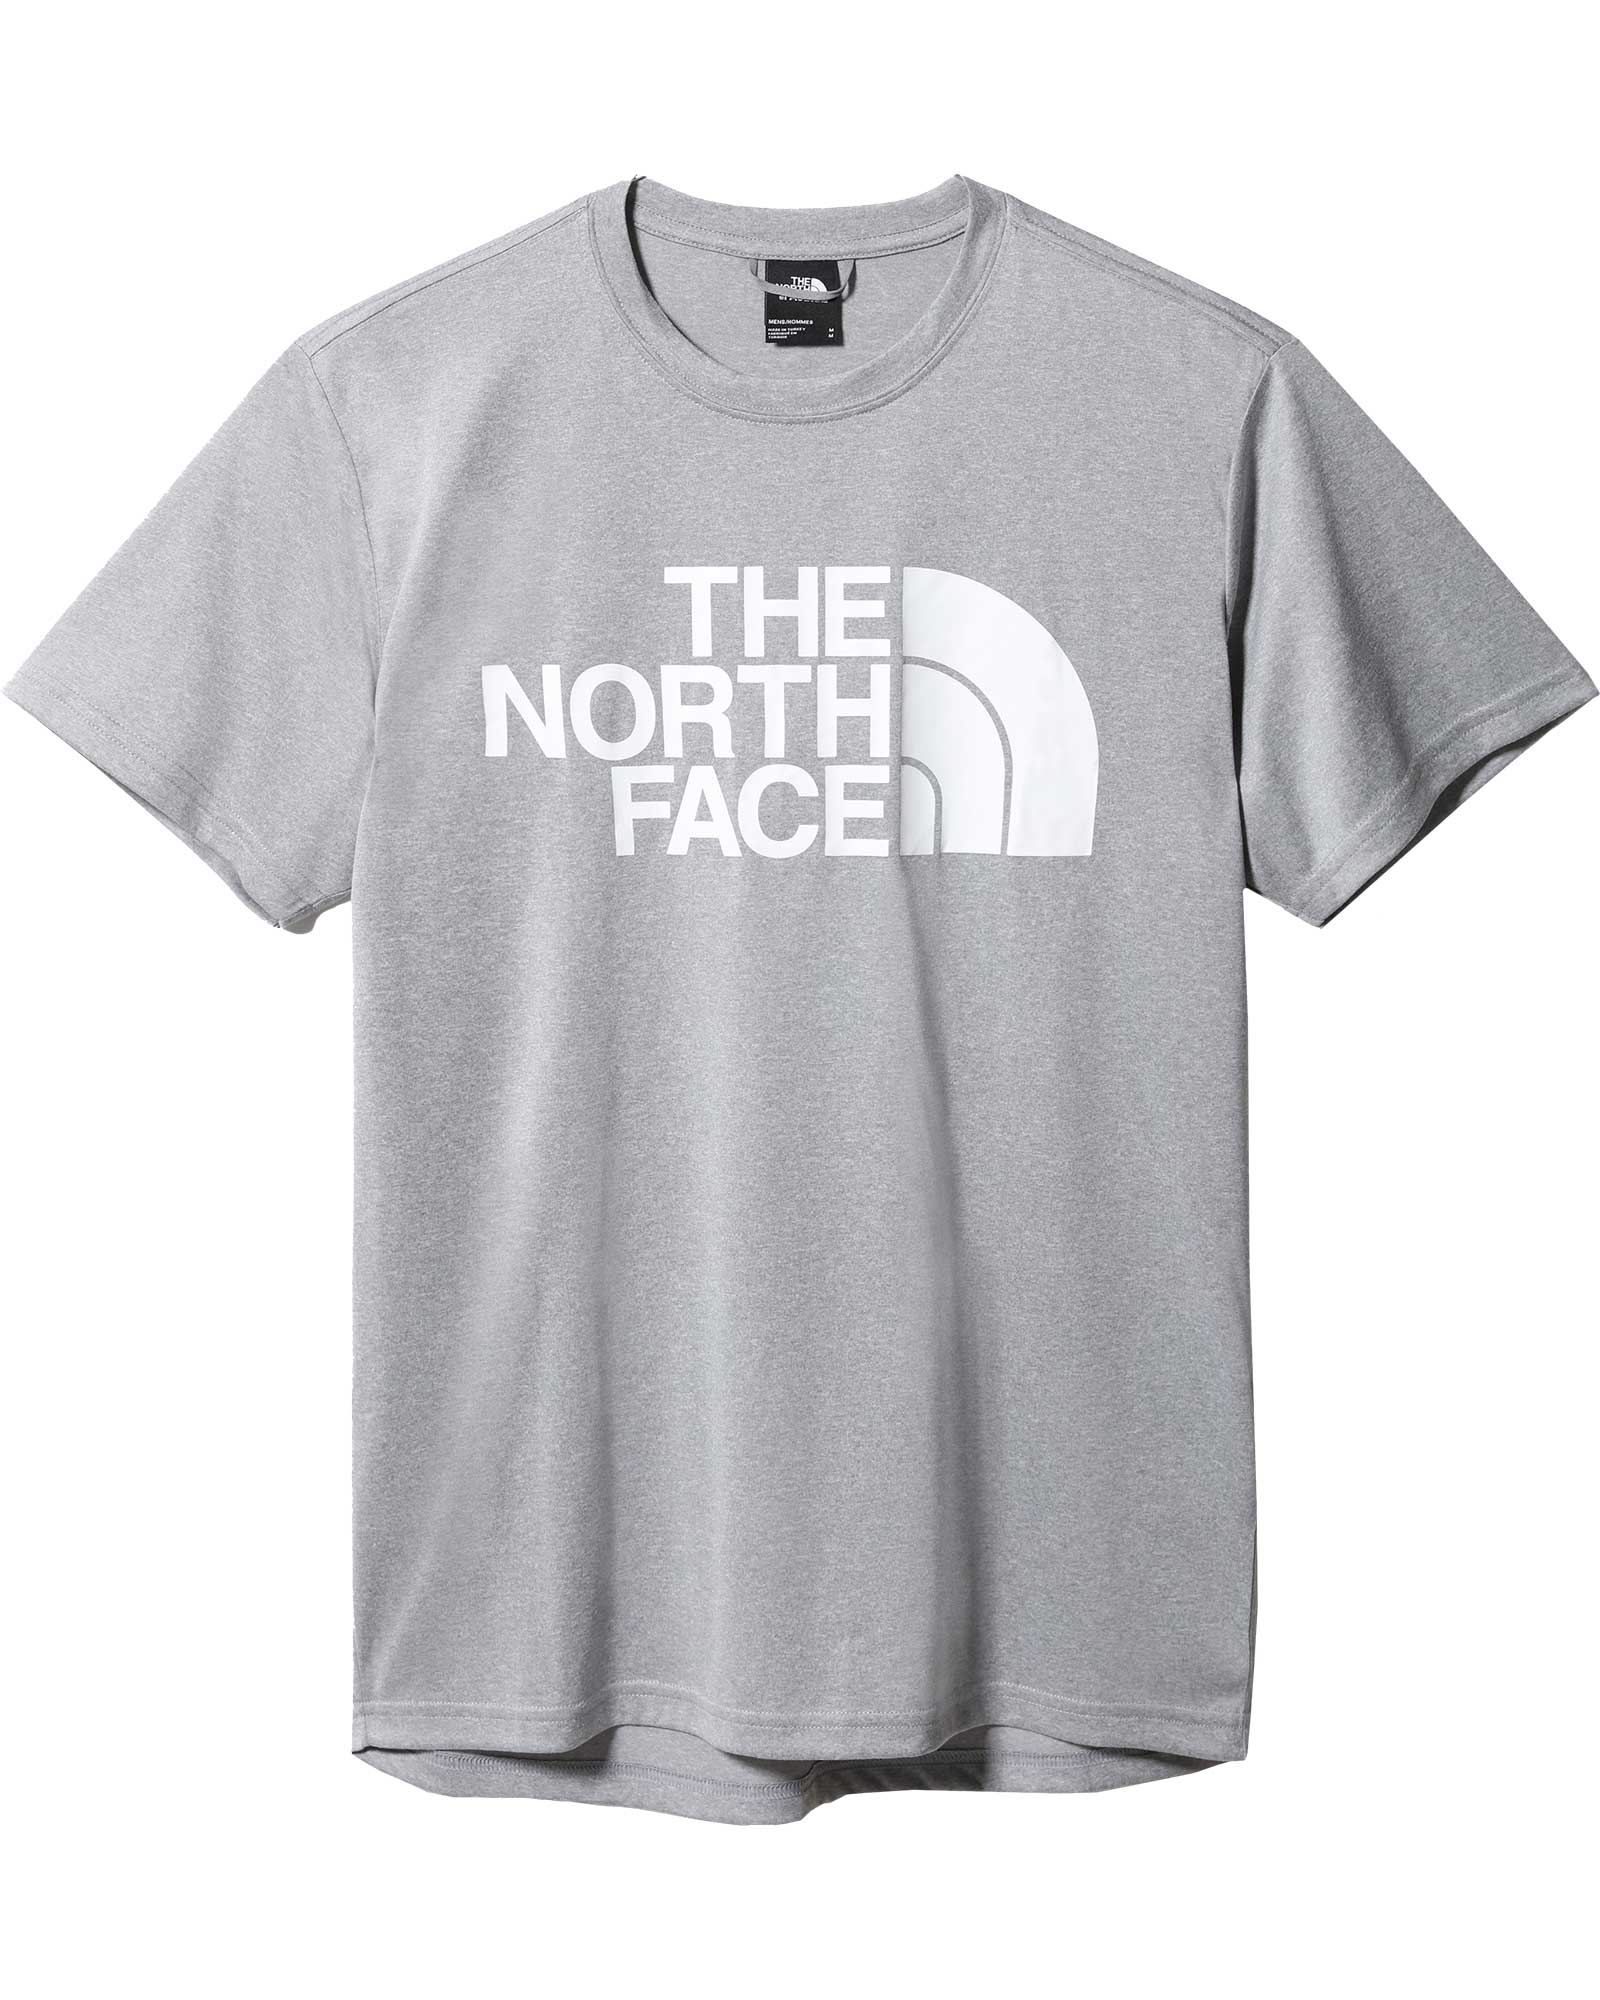 The North Face Reaxion Easy Men’s T Shirt - Mid Grey Heather S